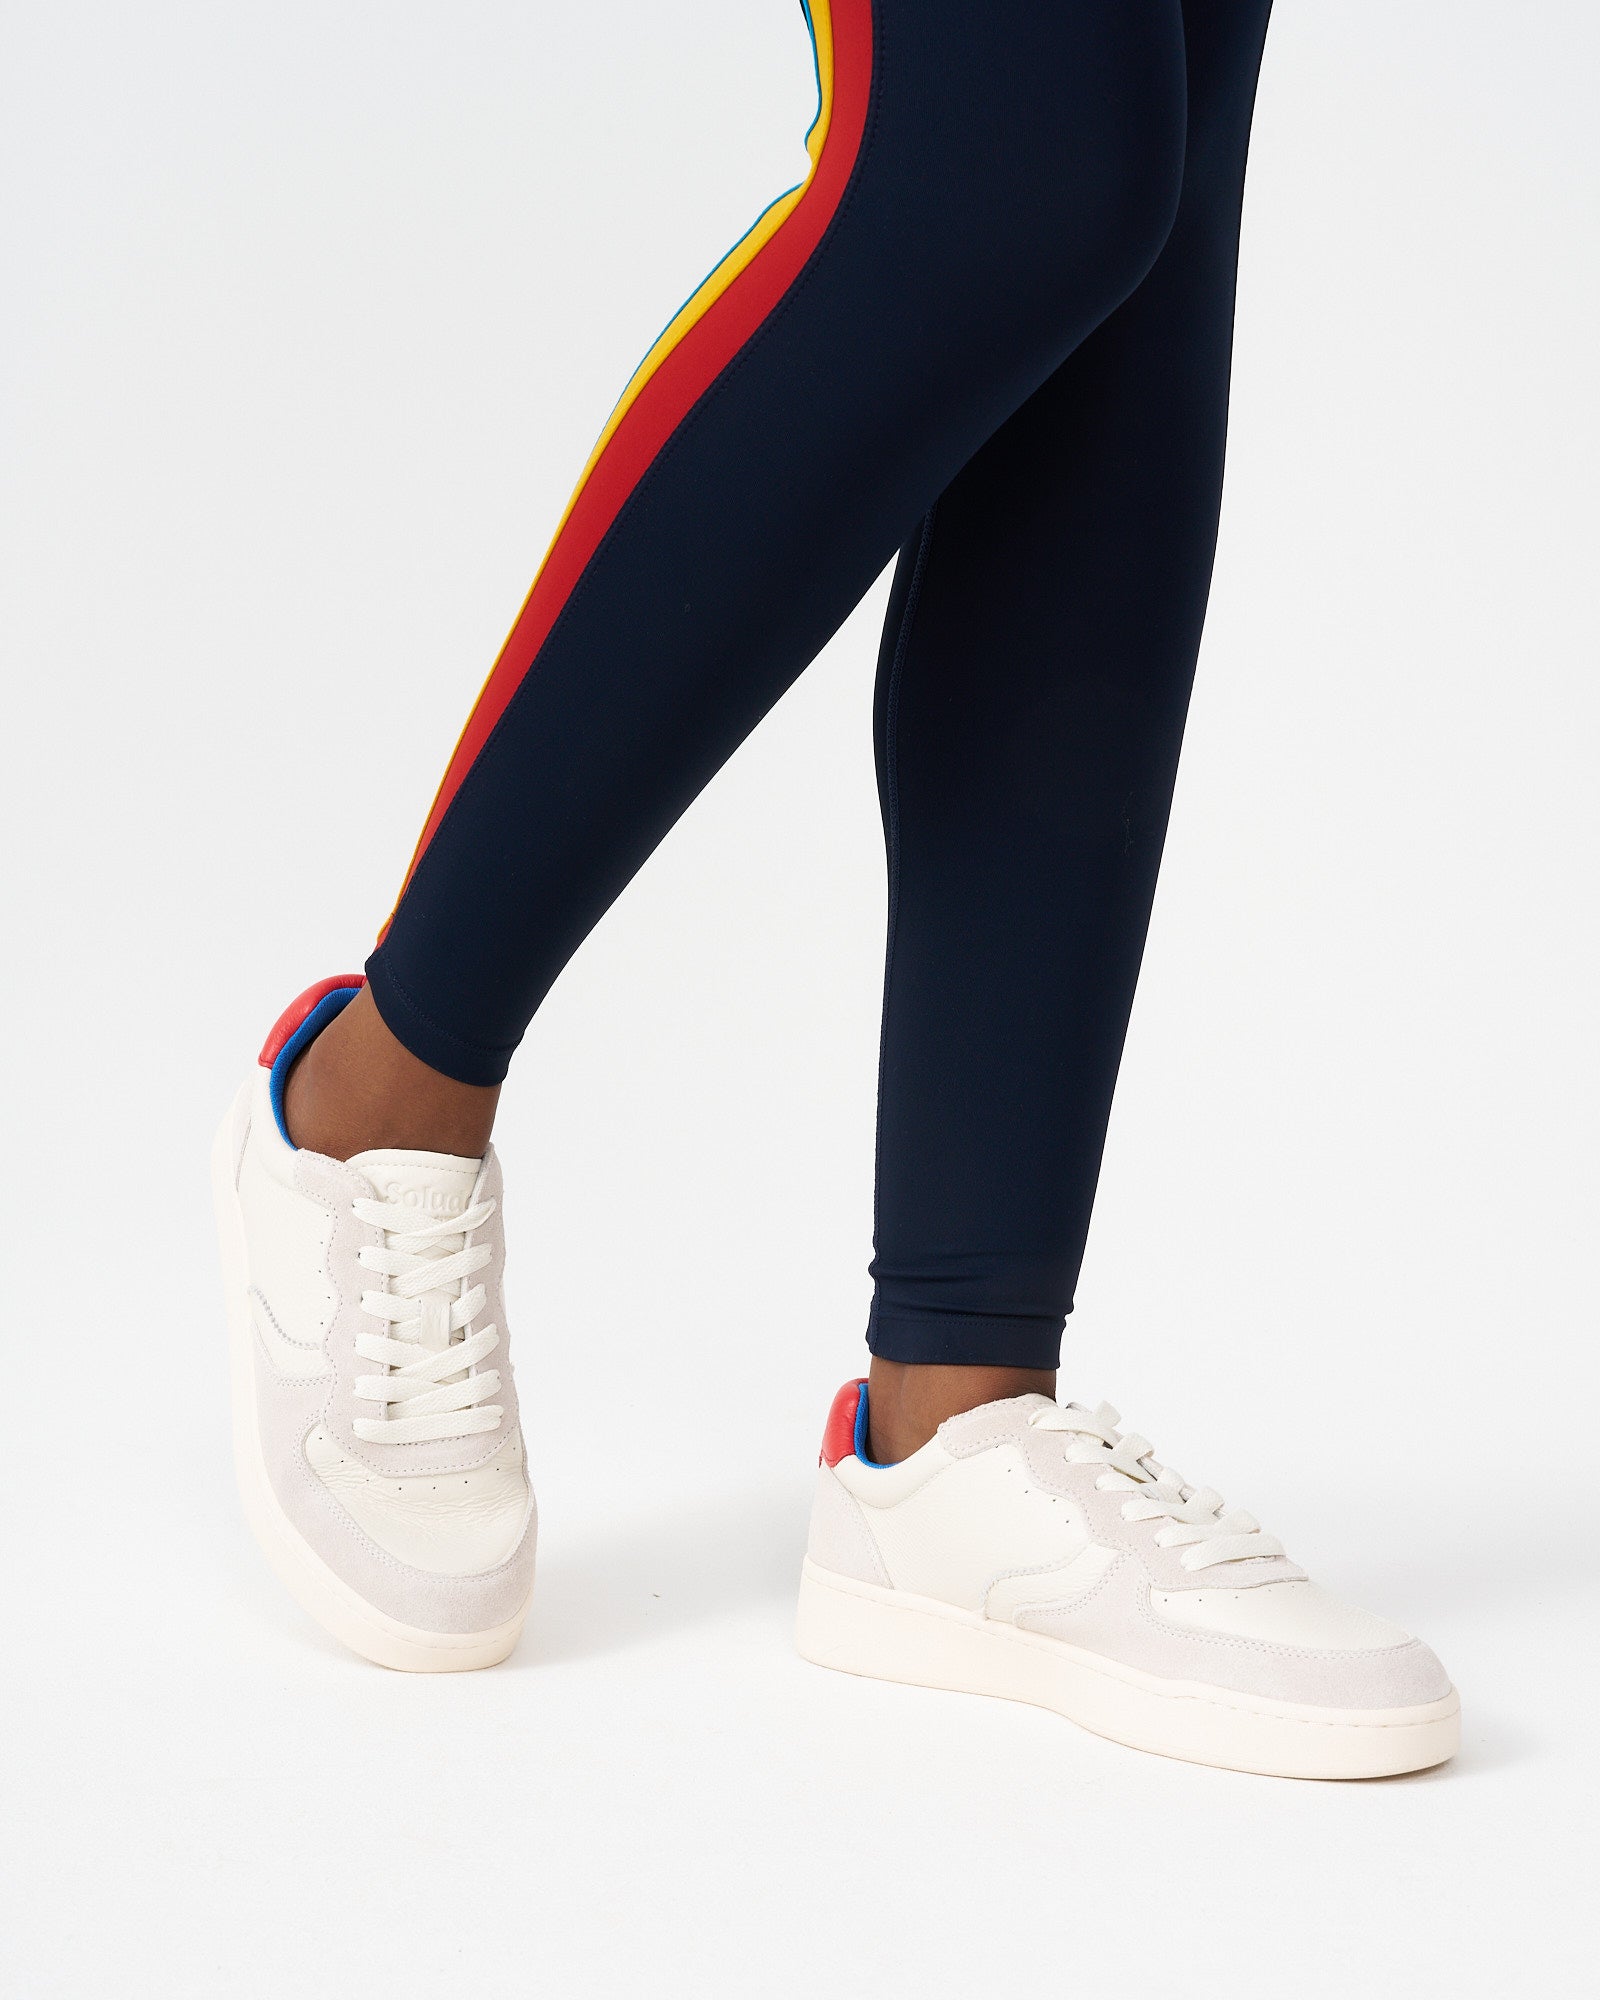 The Roma - Classic - White / Red / French Blue - Women's